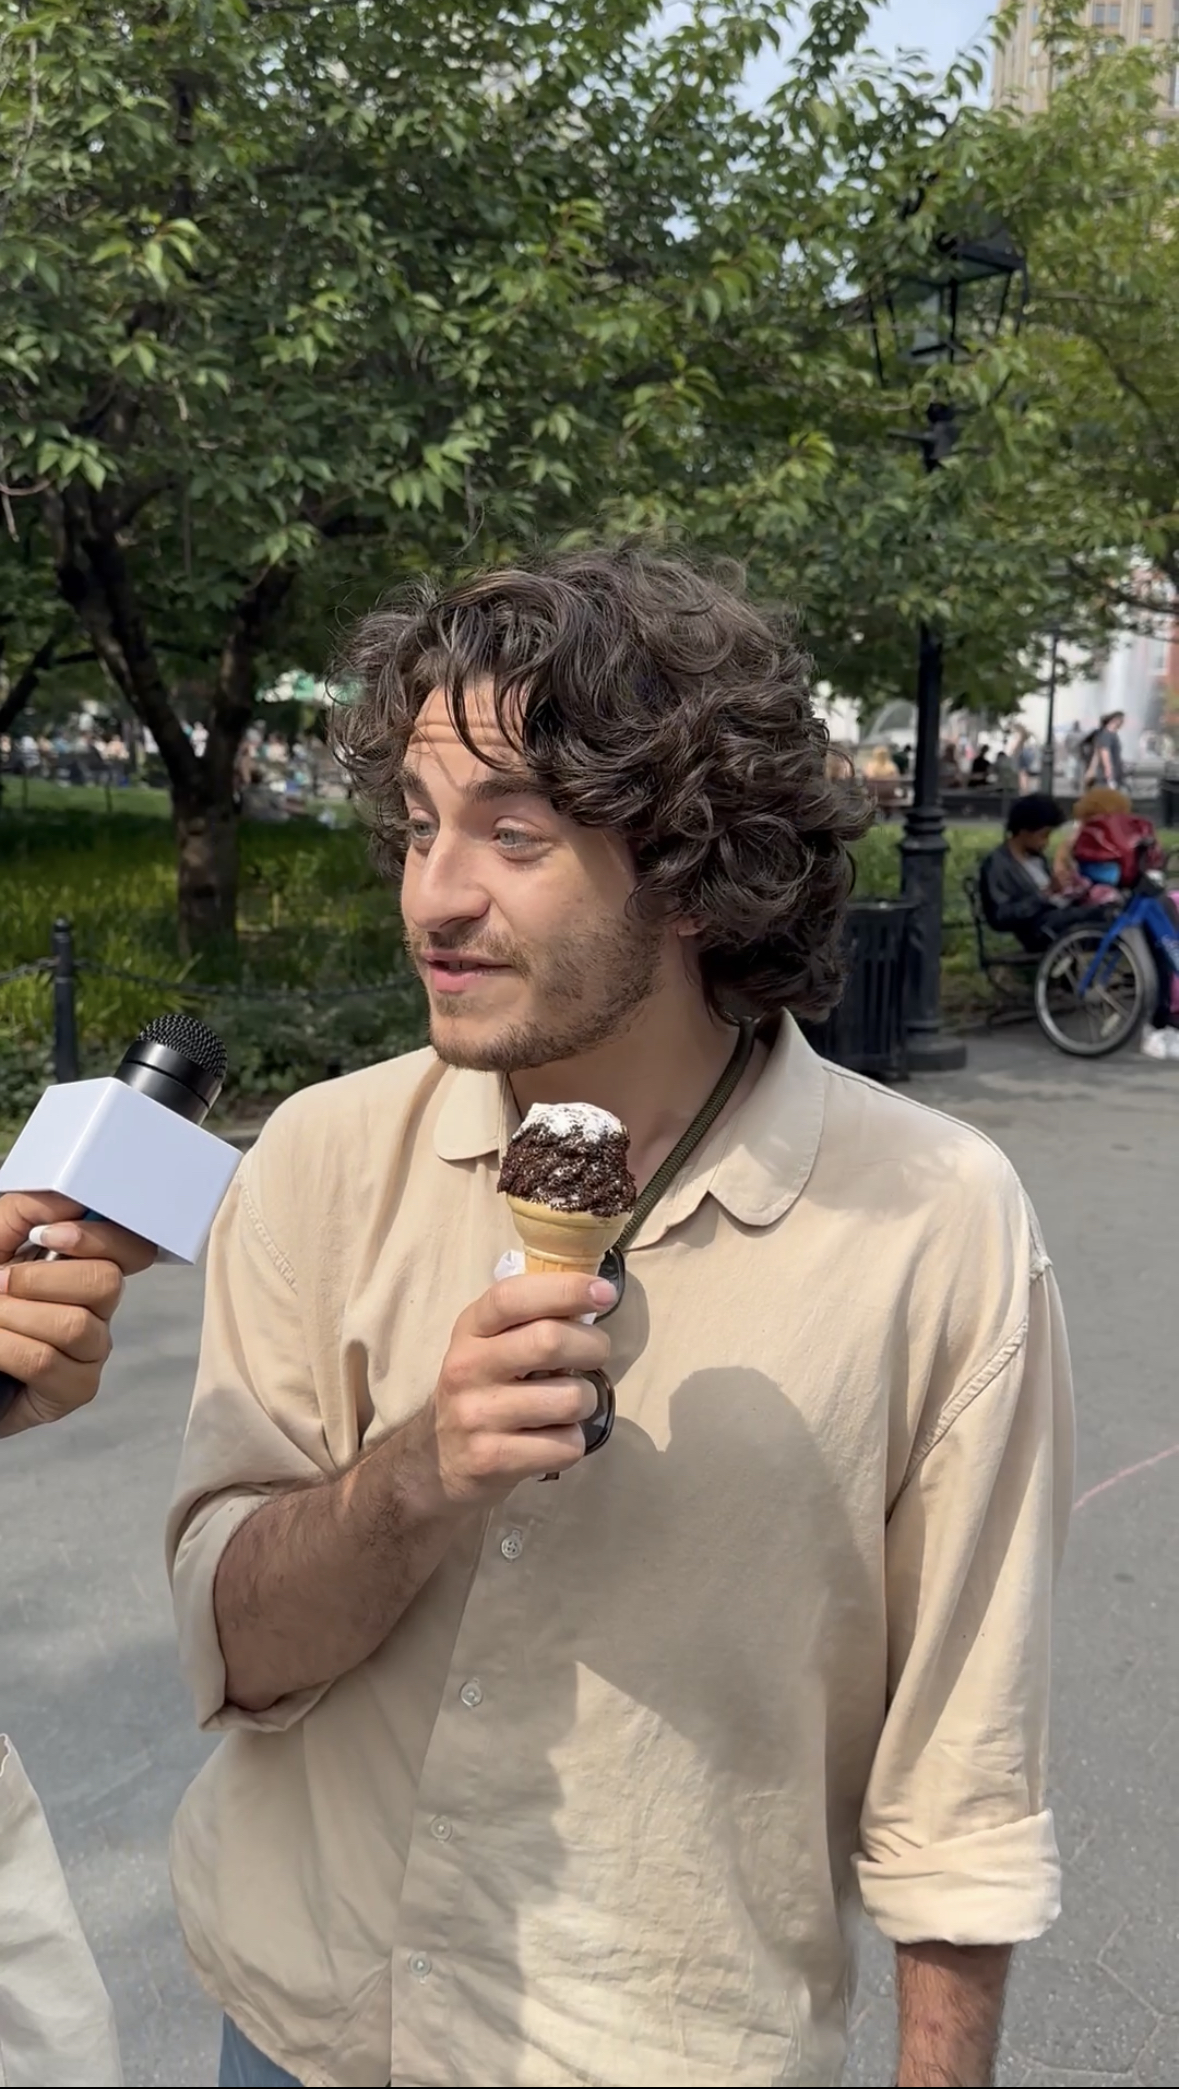 Ezra eats an ice cream cone and dishes about the Jennifer Lawrence cover.